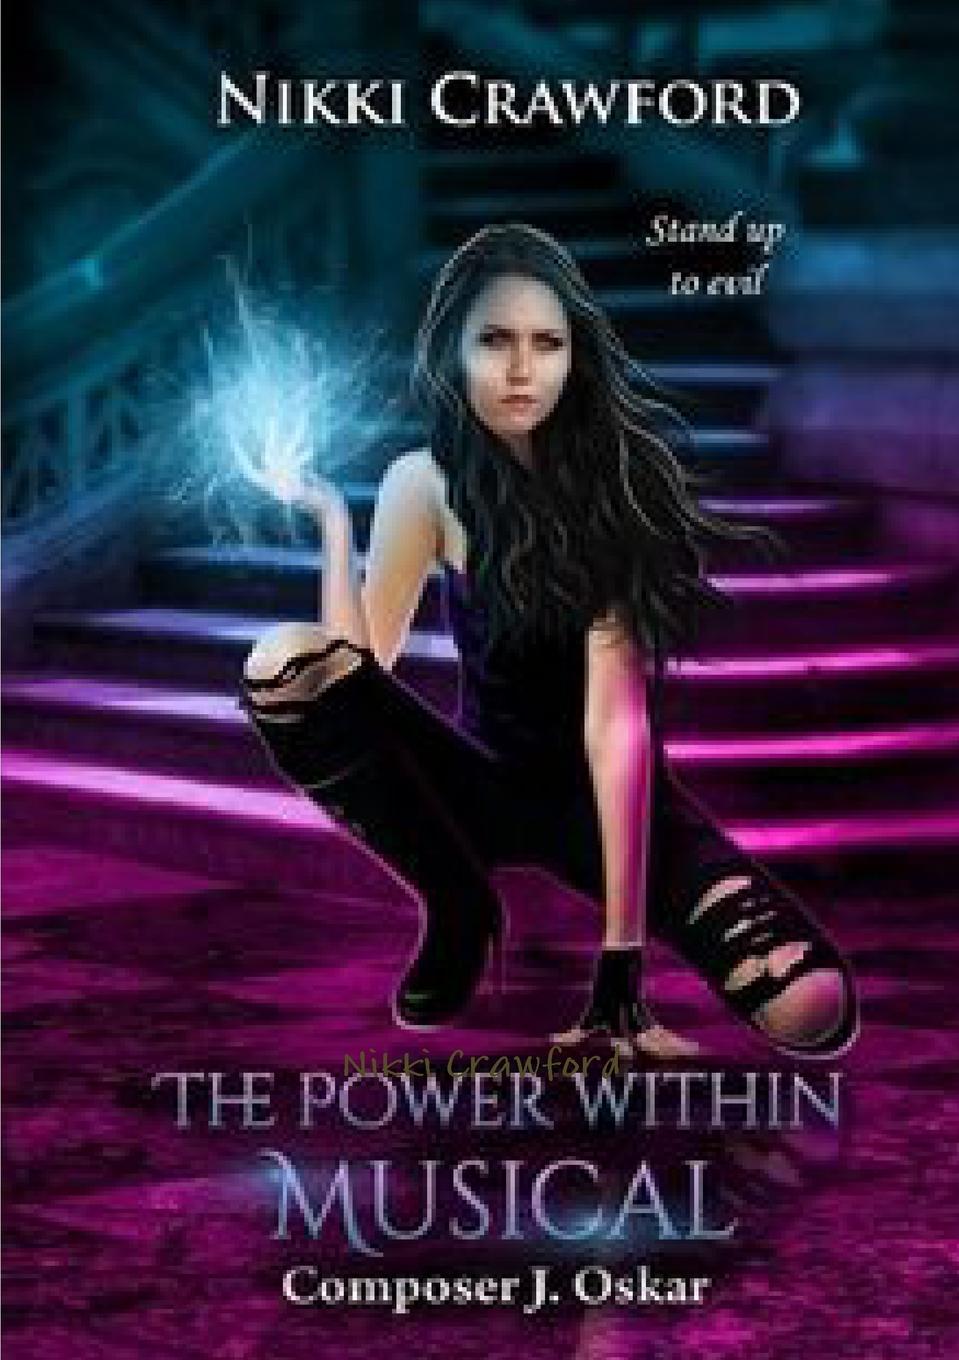 The power within